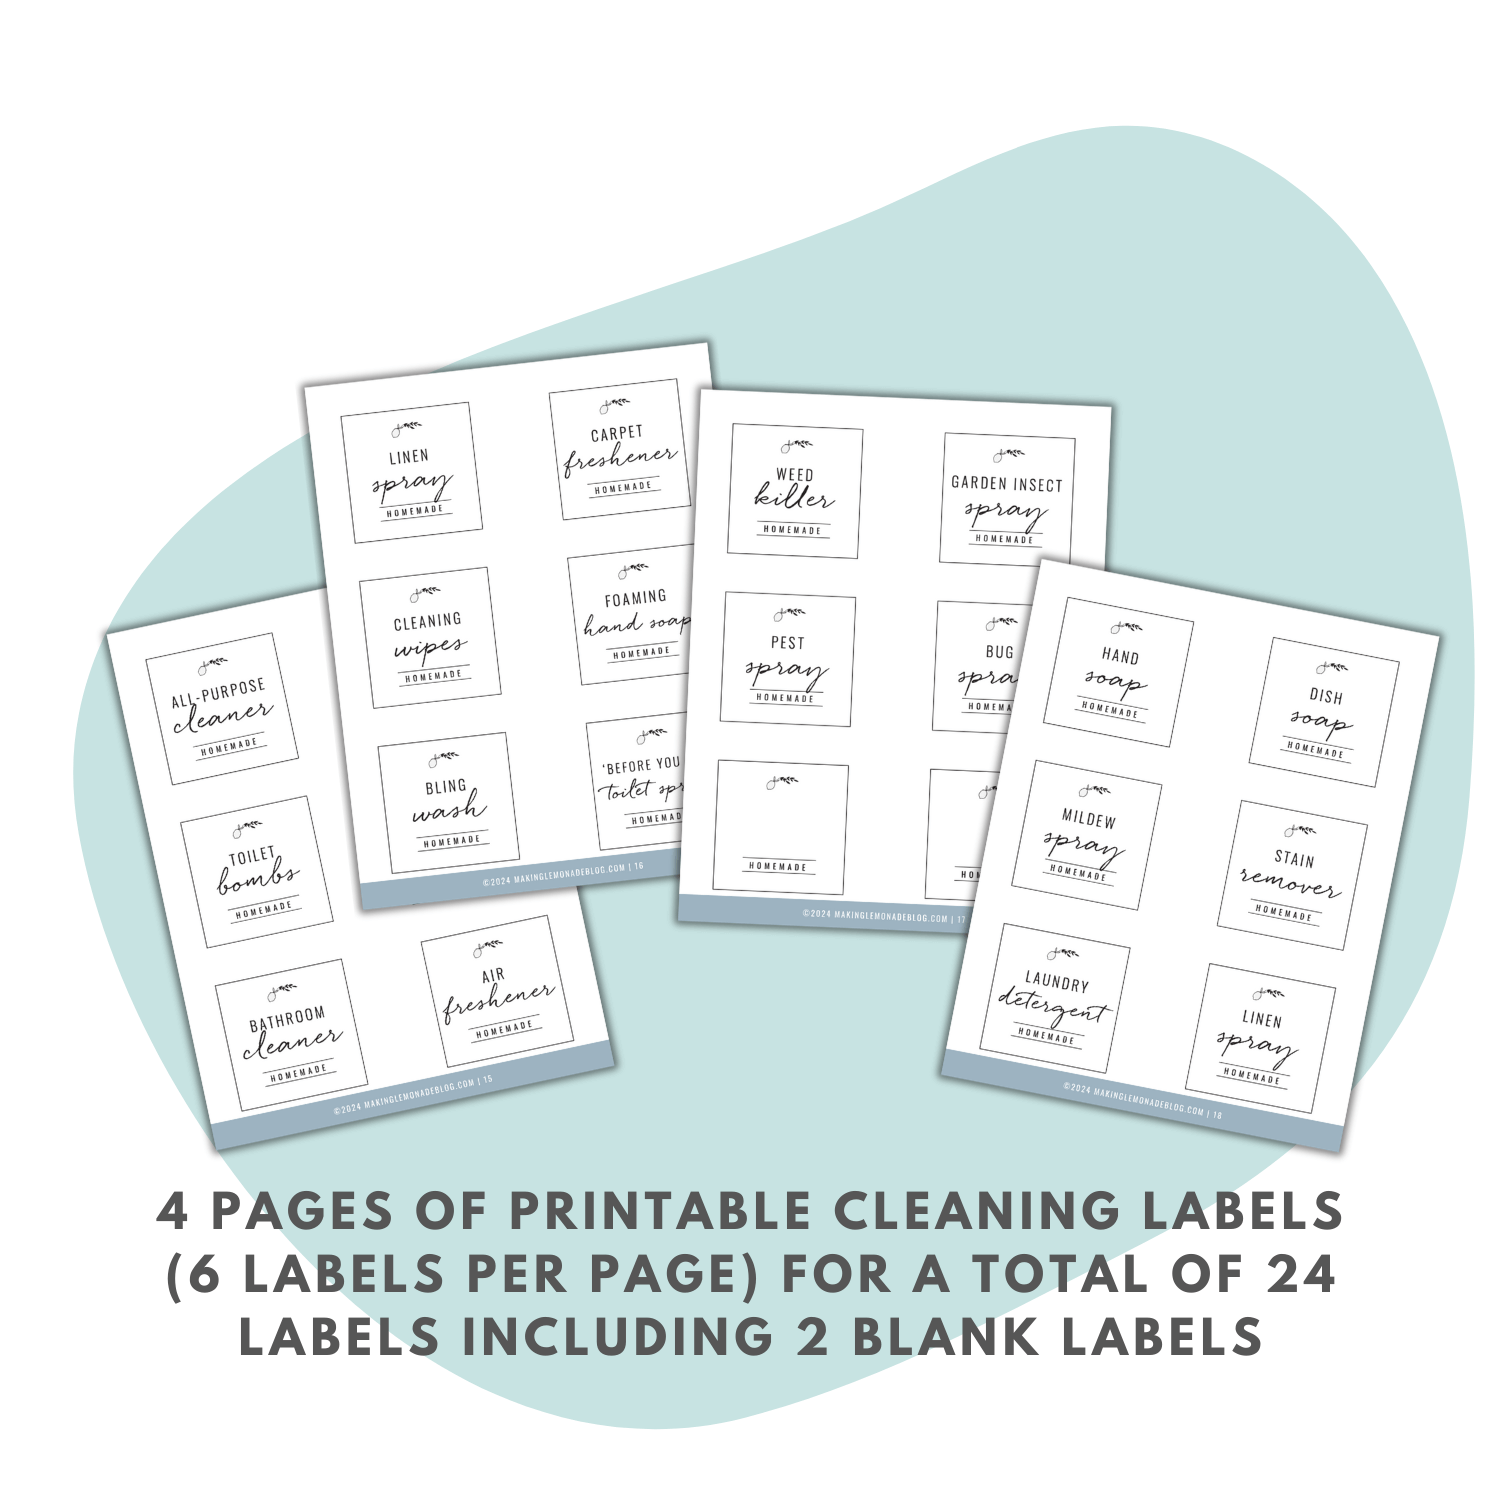 Mockup pages of printable cleaning labels